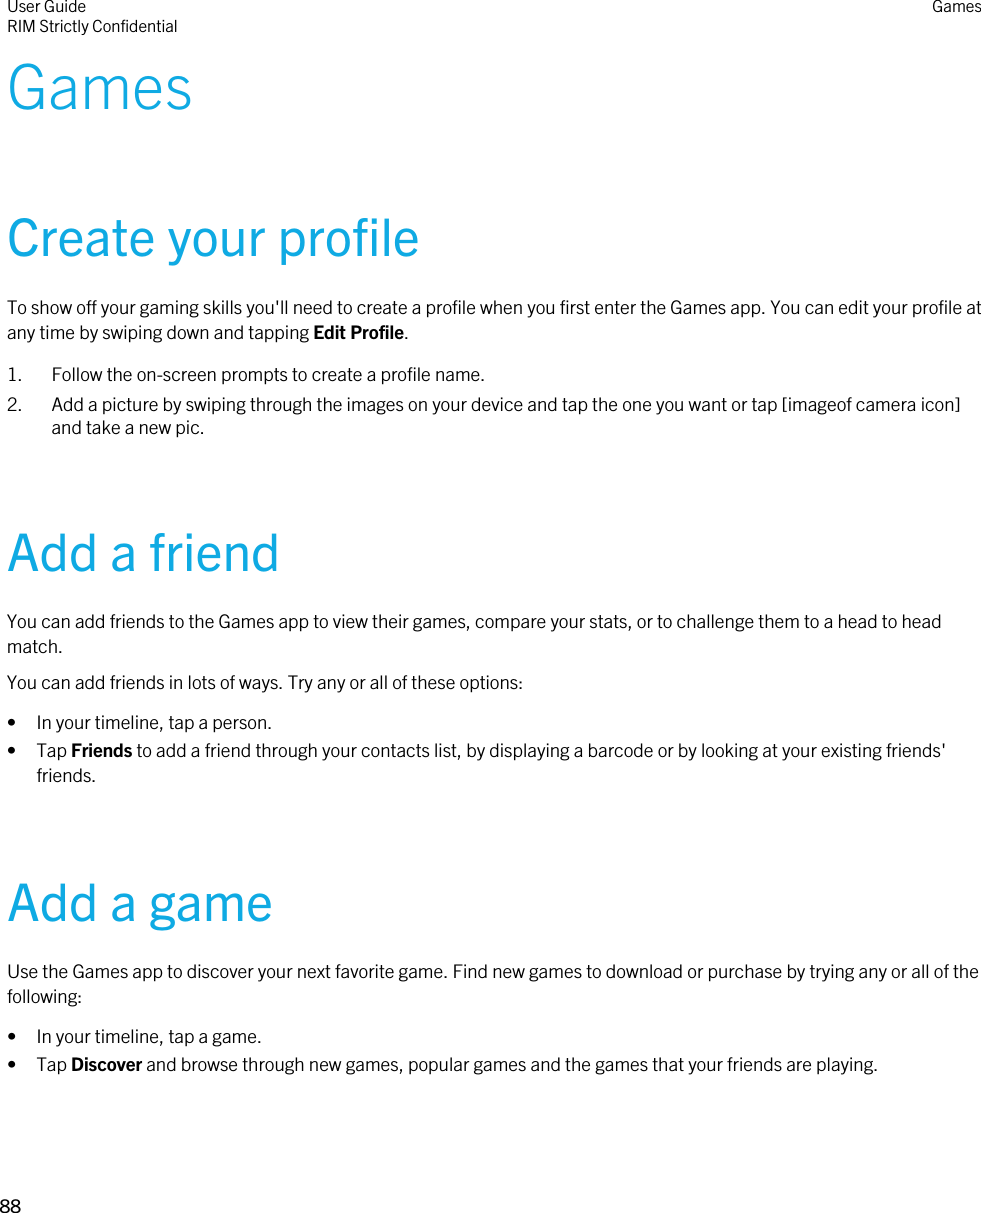 GamesCreate your profileTo show off your gaming skills you&apos;ll need to create a profile when you first enter the Games app. You can edit your profile at any time by swiping down and tapping Edit Profile.1. Follow the on-screen prompts to create a profile name.2. Add a picture by swiping through the images on your device and tap the one you want or tap [imageof camera icon] and take a new pic.Add a friendYou can add friends to the Games app to view their games, compare your stats, or to challenge them to a head to head match.You can add friends in lots of ways. Try any or all of these options:• In your timeline, tap a person.• Tap Friends to add a friend through your contacts list, by displaying a barcode or by looking at your existing friends&apos; friends.Add a gameUse the Games app to discover your next favorite game. Find new games to download or purchase by trying any or all of the following:• In your timeline, tap a game.• Tap Discover and browse through new games, popular games and the games that your friends are playing.User GuideRIM Strictly ConfidentialGames88 